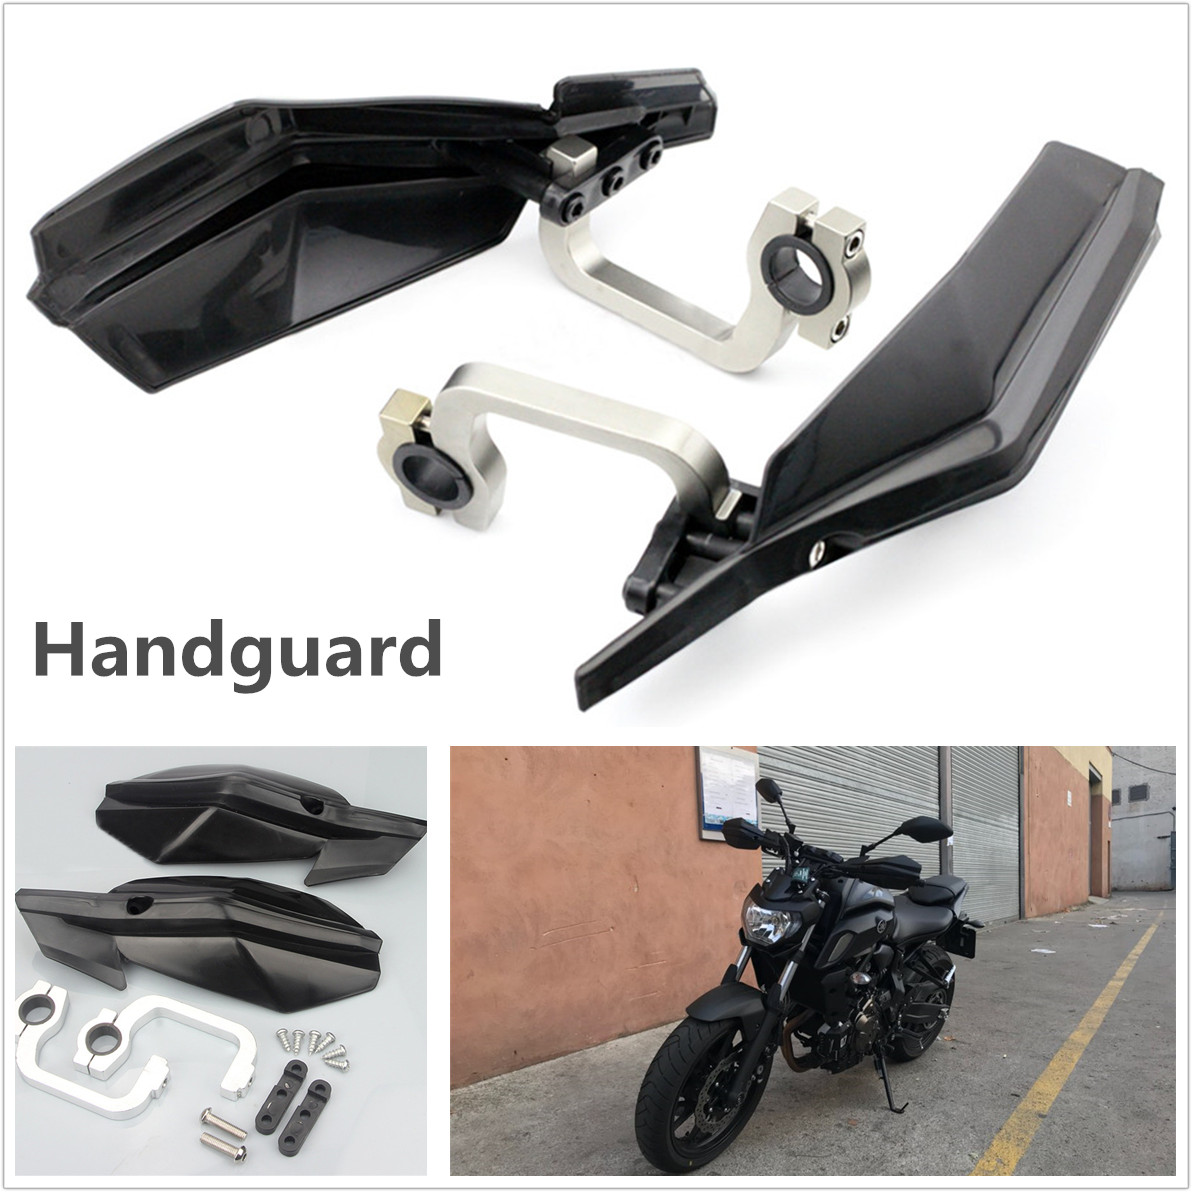 2 X Motorcycle 7/8" Brake Clutch Lever Protector Protection Handguard Hand Guard